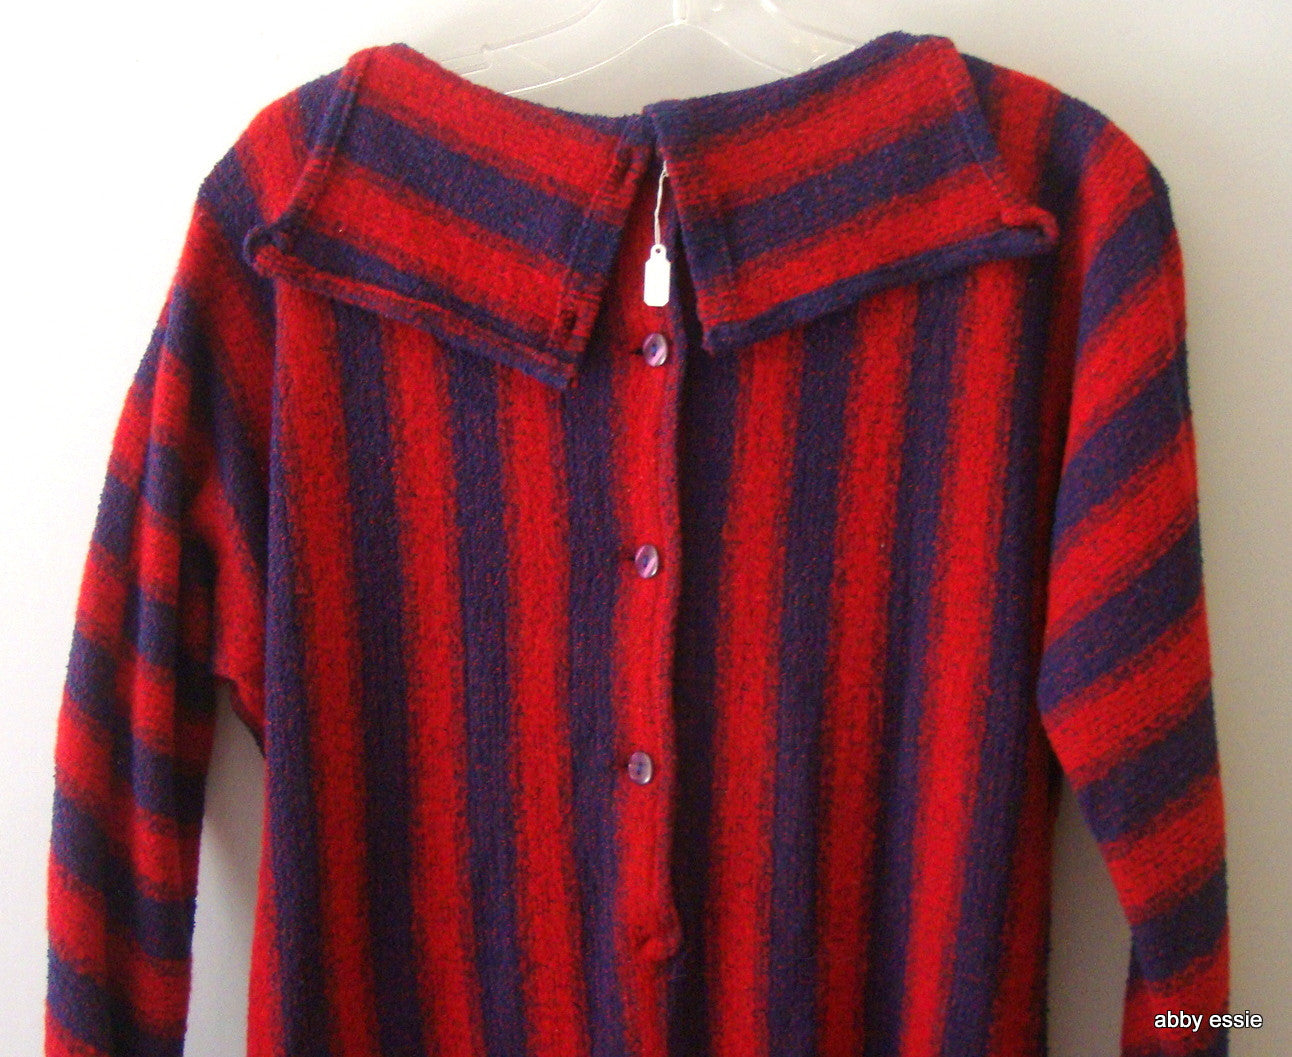 Antique Striped Wool Knit Peasant Festival Dress Abby Essie